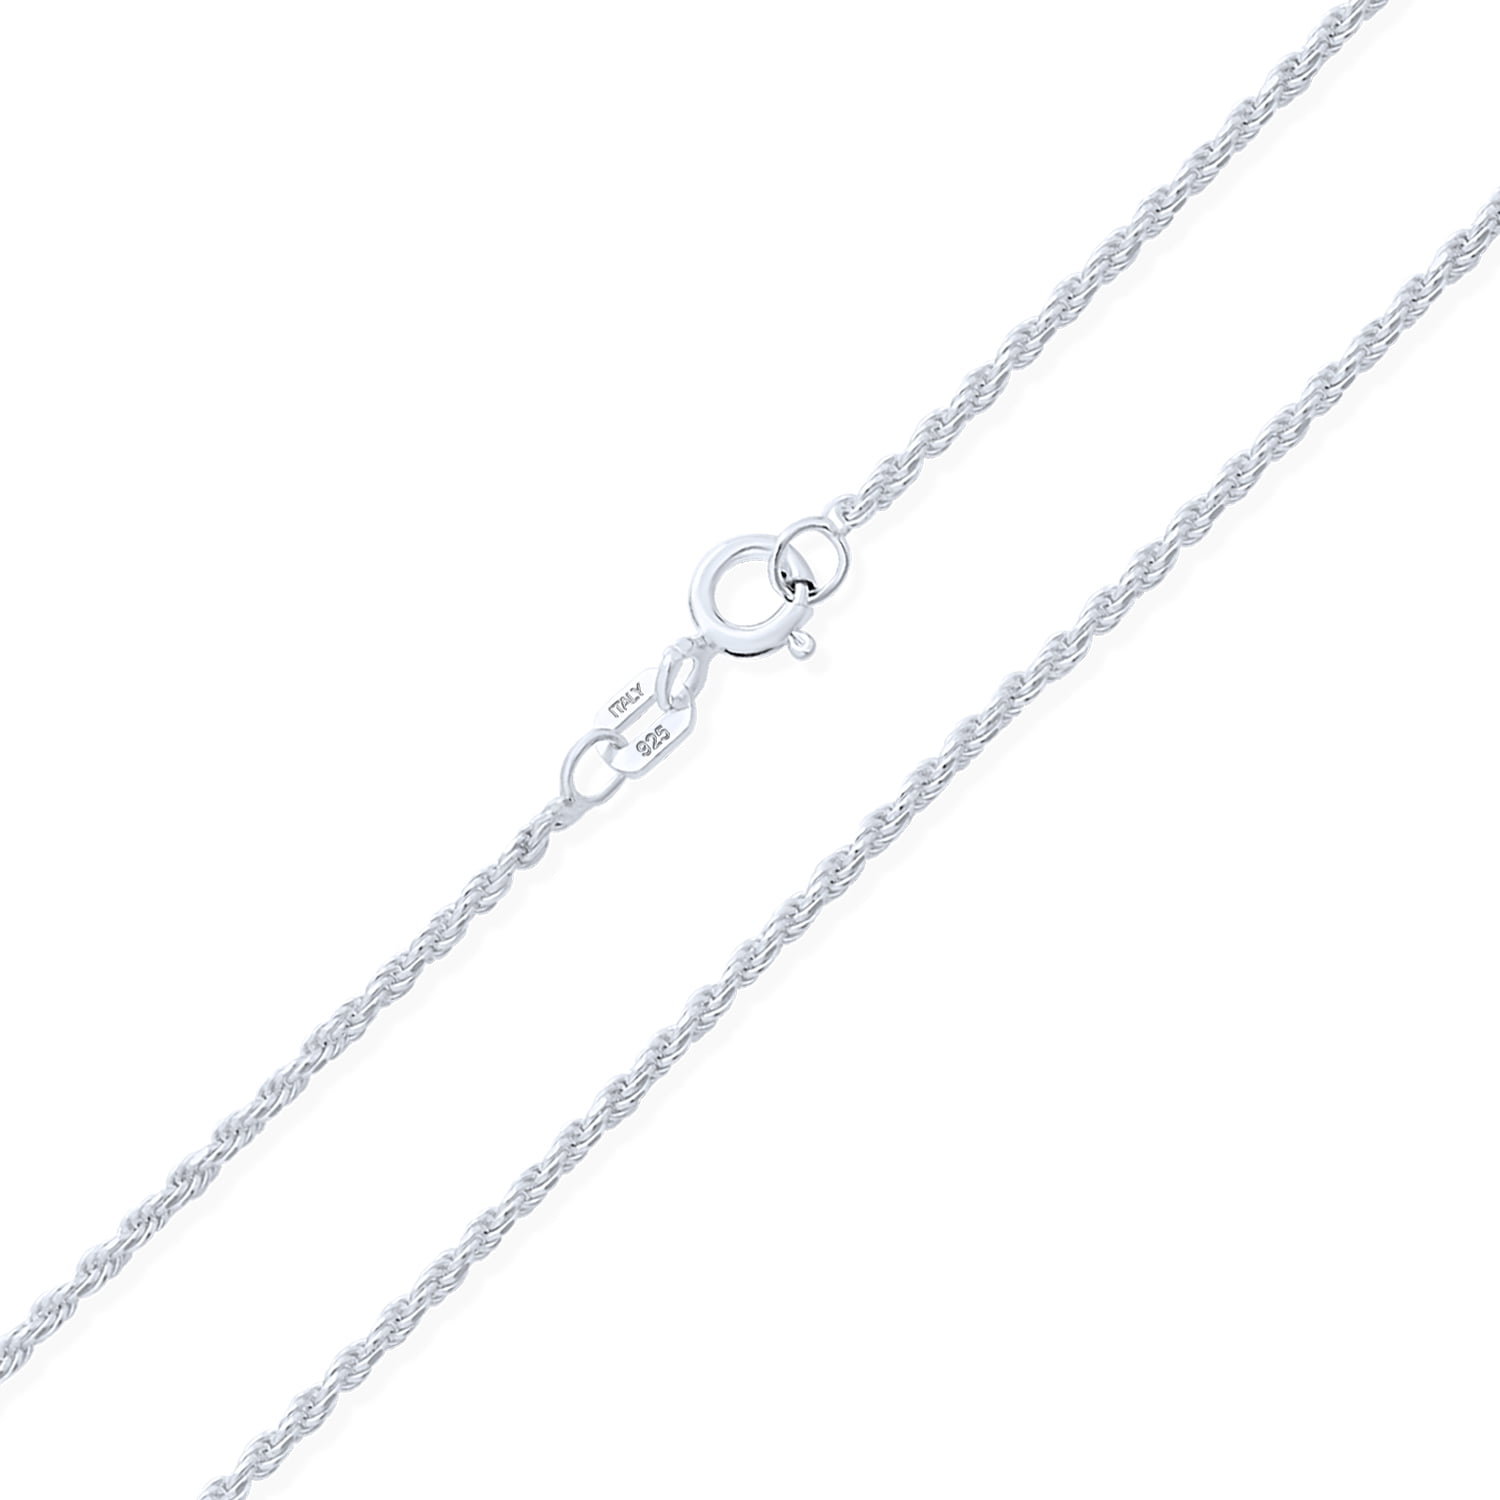 Solid Italian 925 Sterling Silver 1.7mm Rolo Cable Chain Necklace All Sizes 14-30